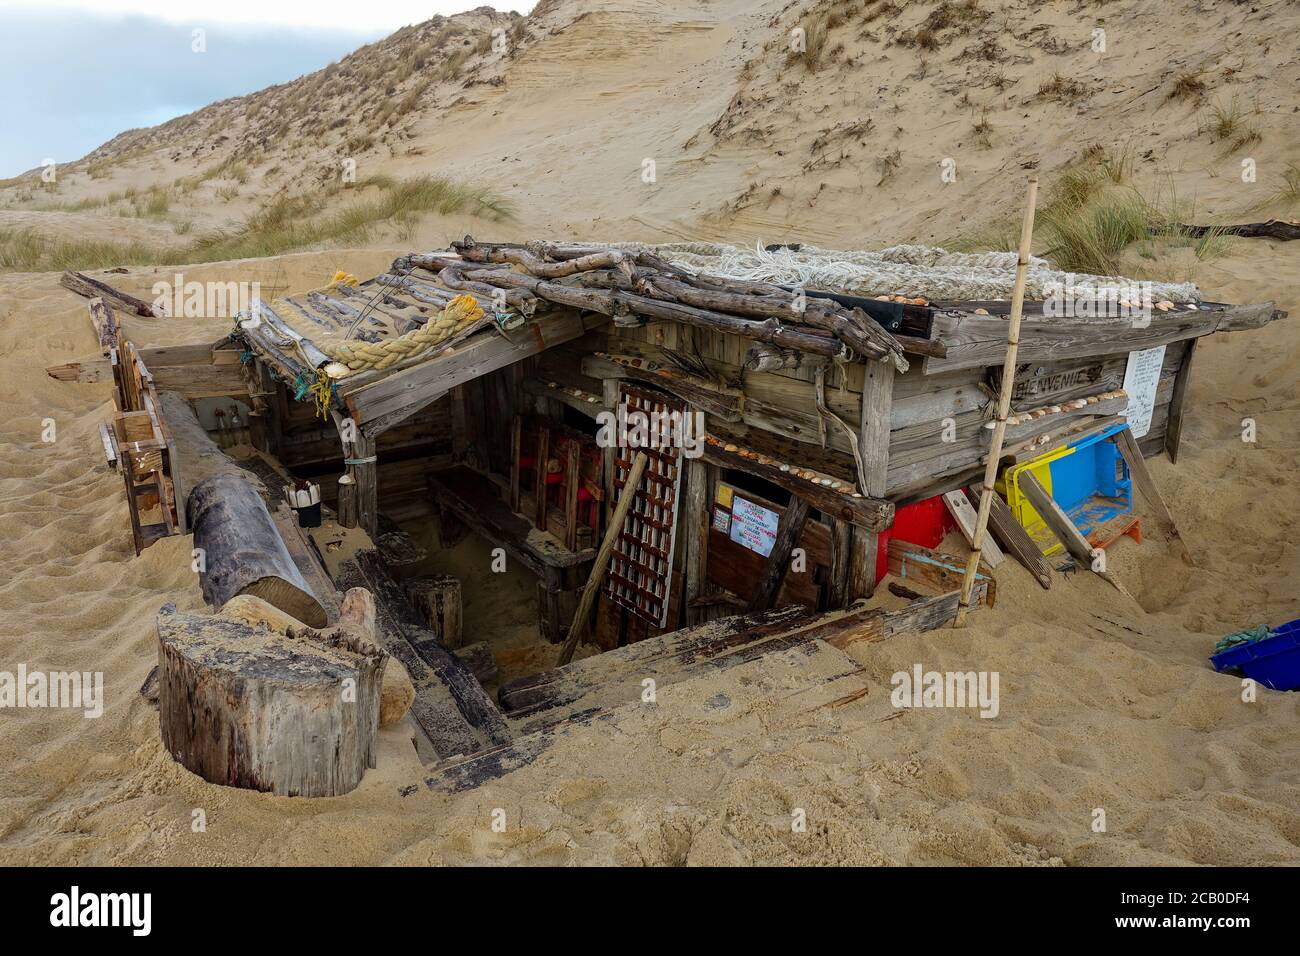 wooden hut made out of trash in the dunes of a wild Atlantic beach at Lacanau Ocean, Gironde, France 2020 Stock Photo